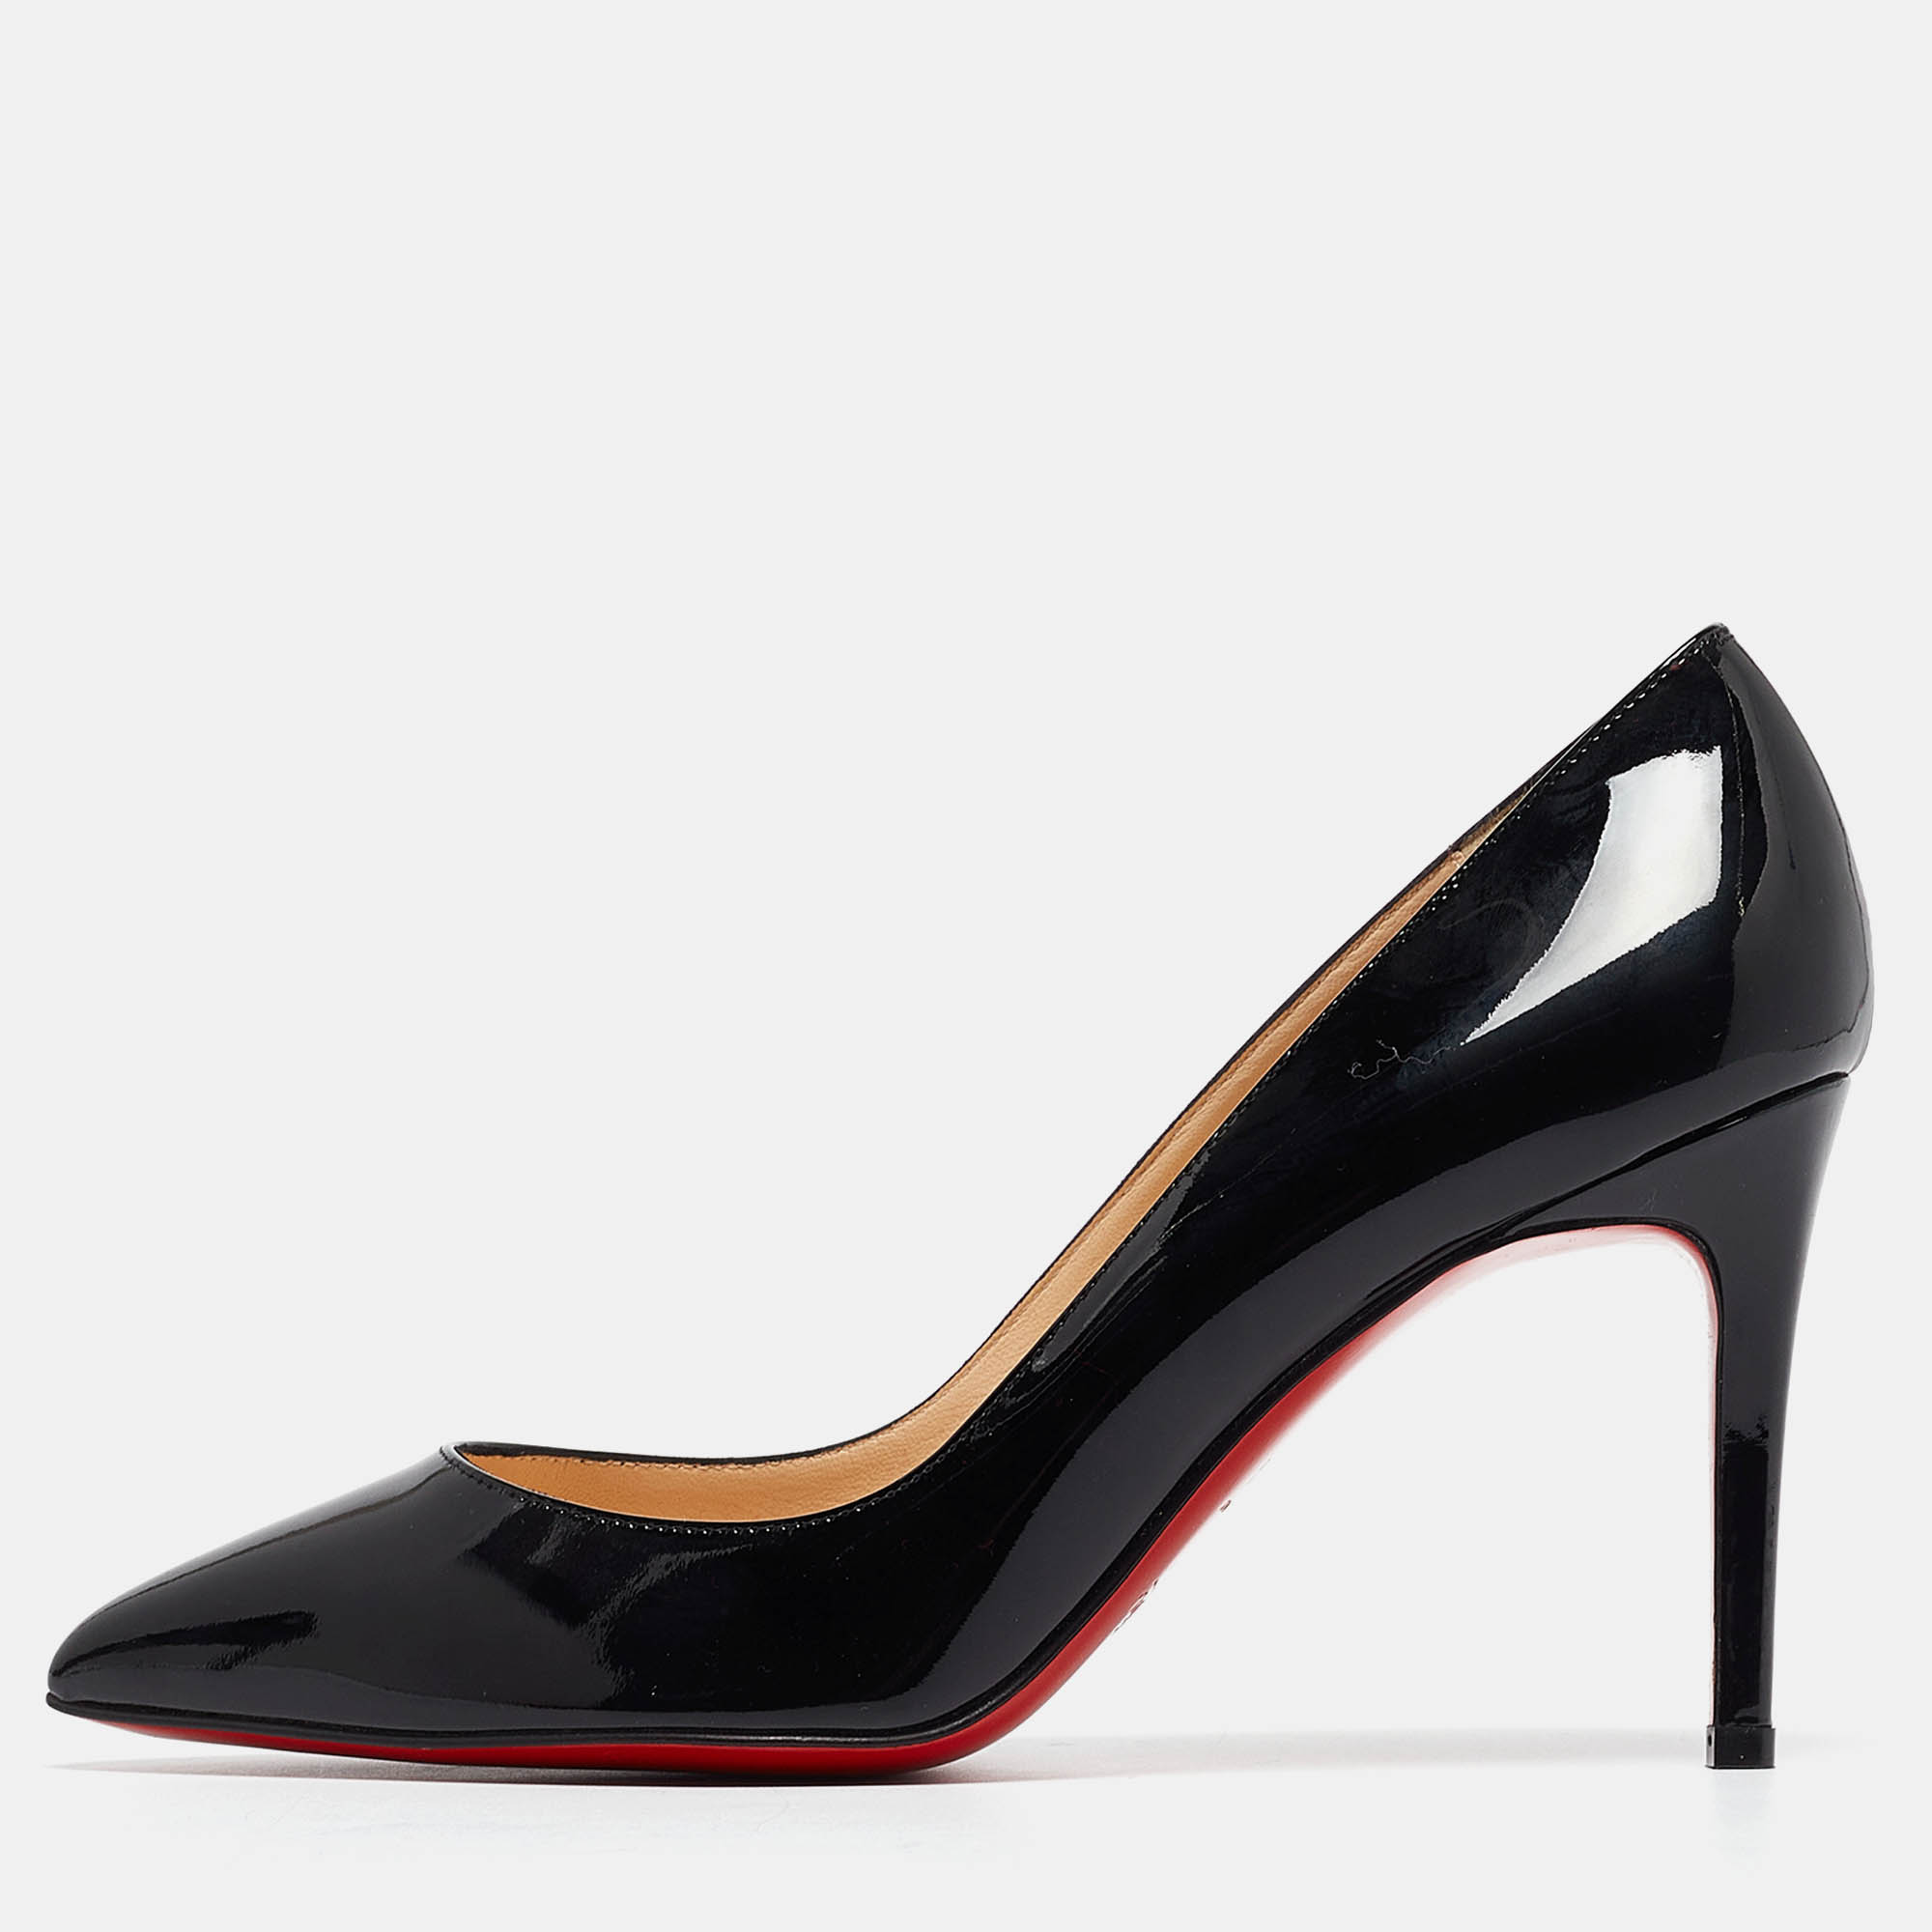 Christian louboutin black patent leather pigalle pumps size 37.5